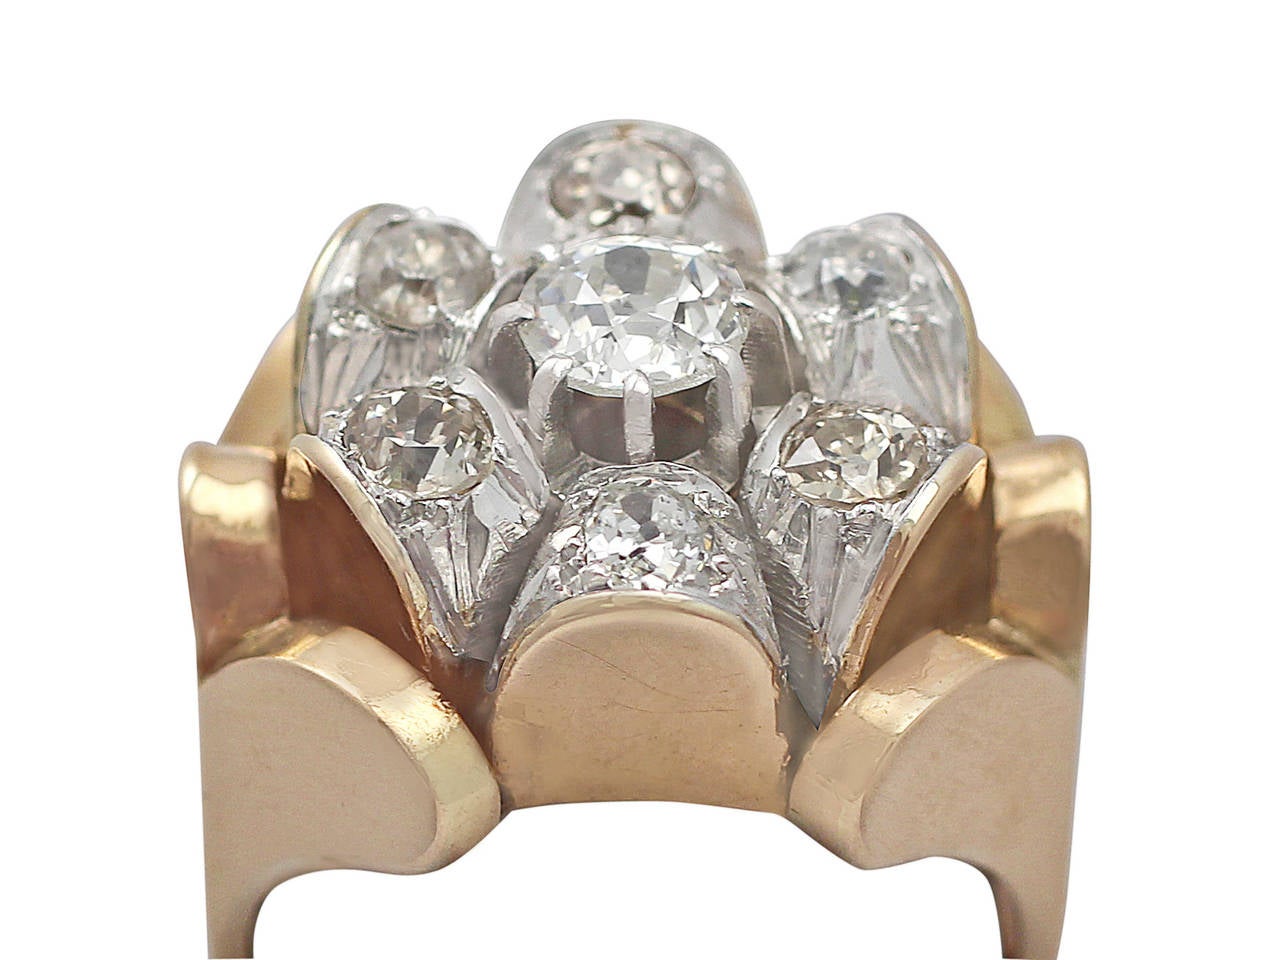 A fine and impressive antique French 1.53 carat diamond, 18k yellow gold ring, 18k white gold set dress ring; part of our antique jewelry/estate jewelry collections.

This fine and unusual antique French ring has been crafted in 18k yellow gold with